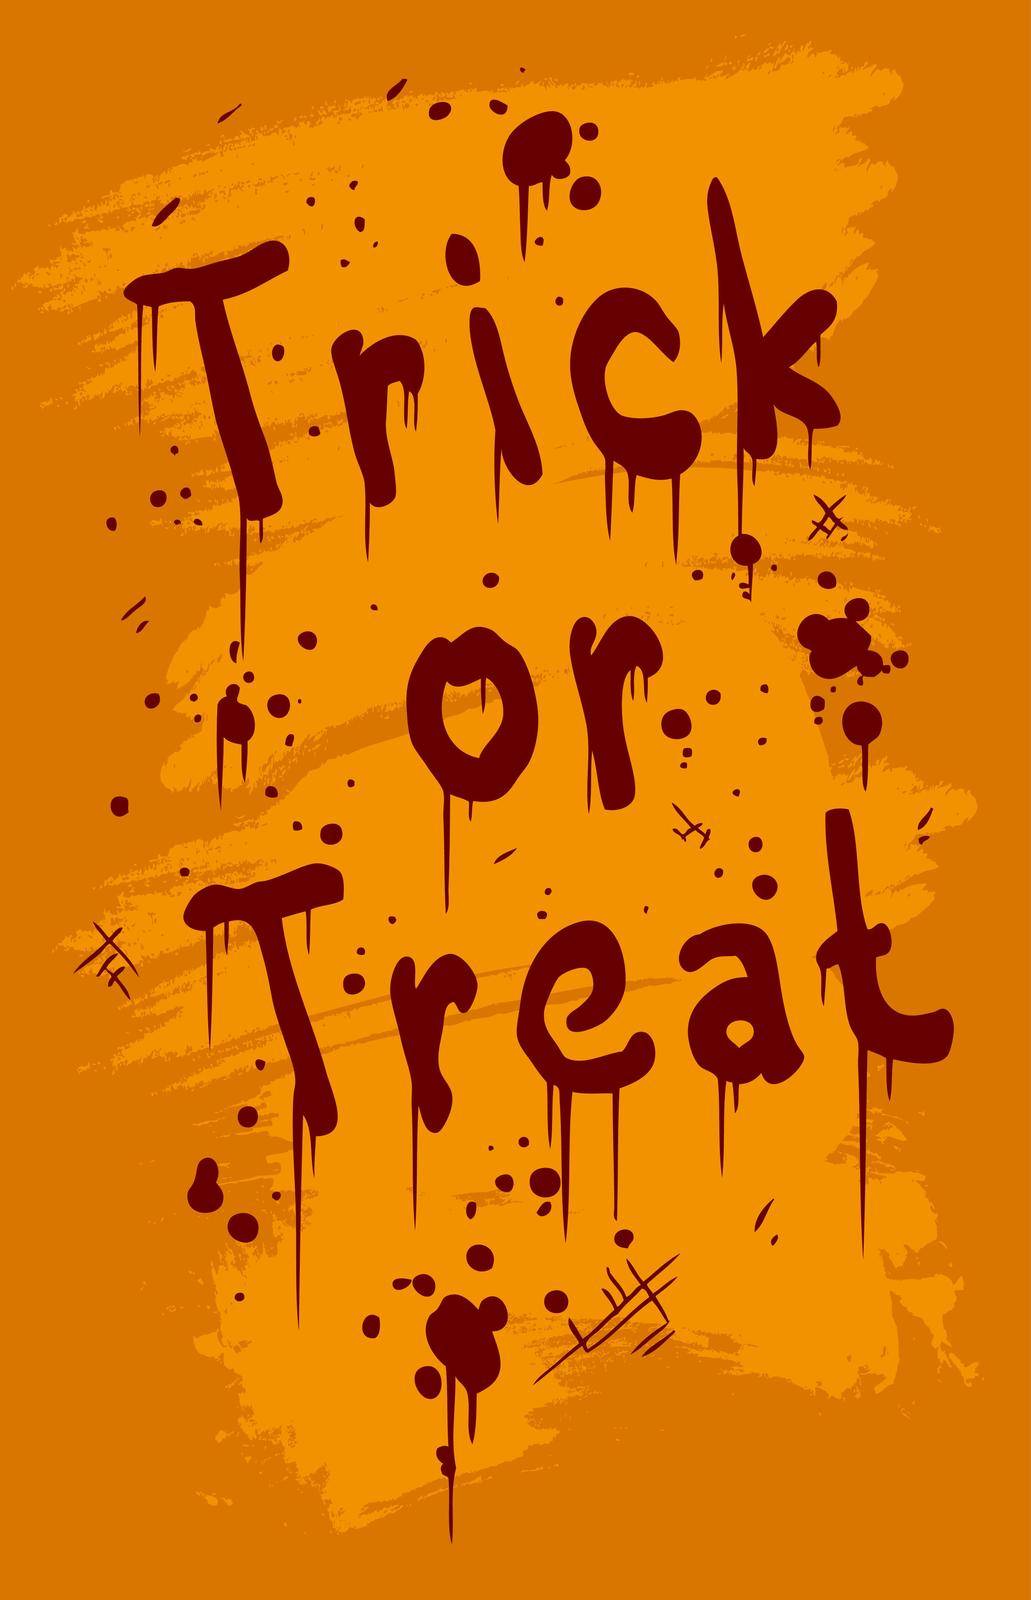 Graphic hand drawn orange sign Trick or Treat by GB_Art